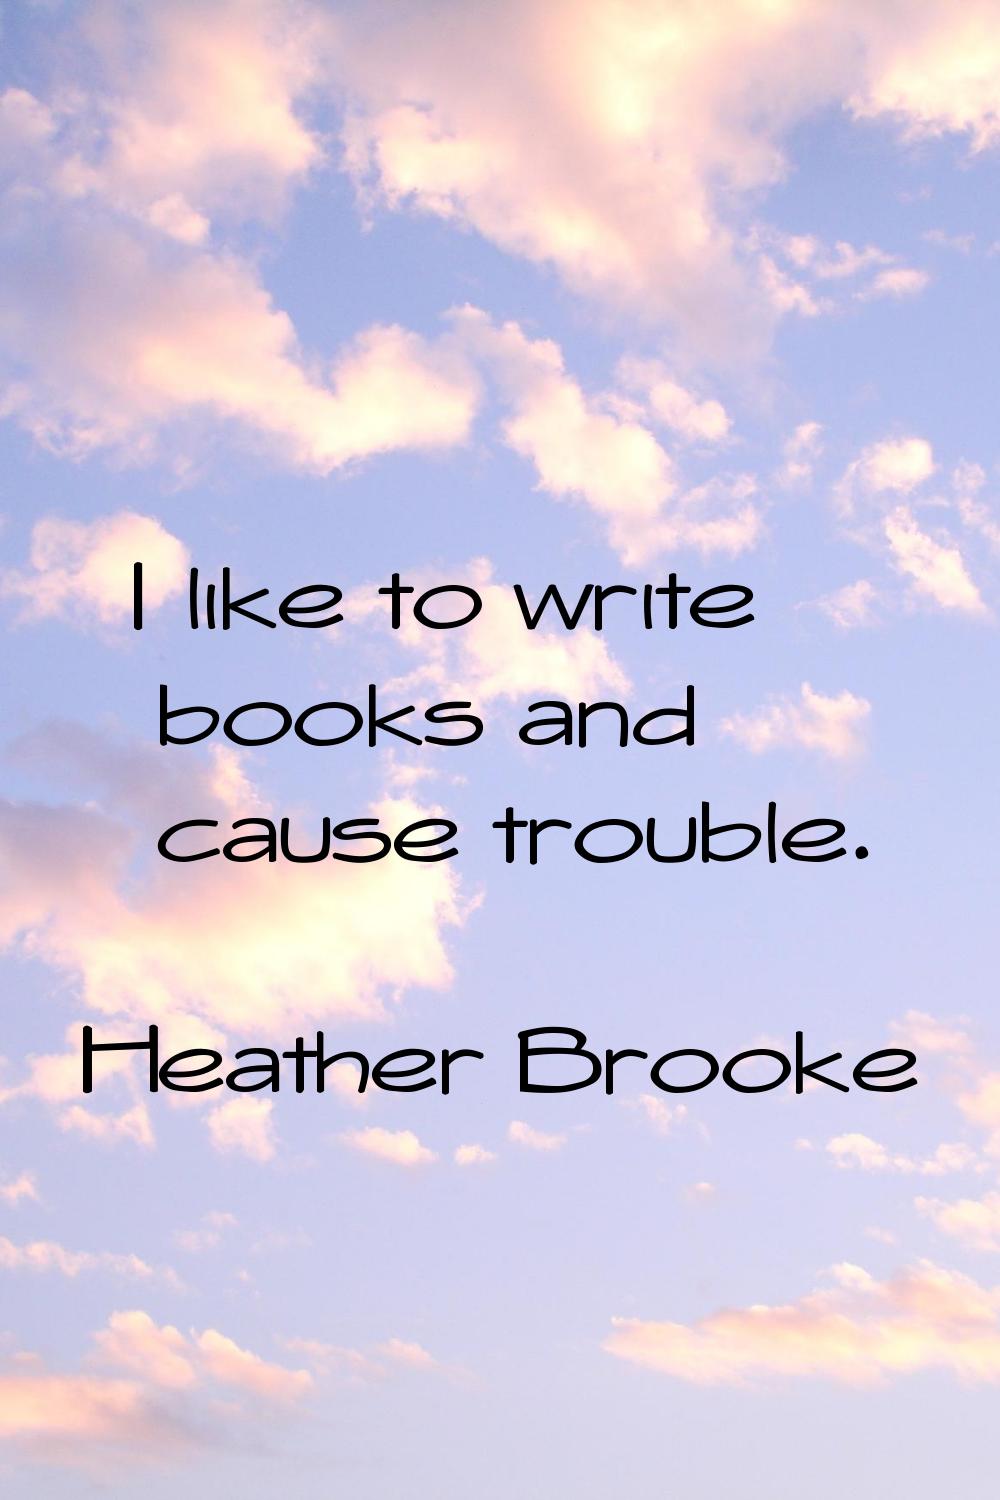 I like to write books and cause trouble.